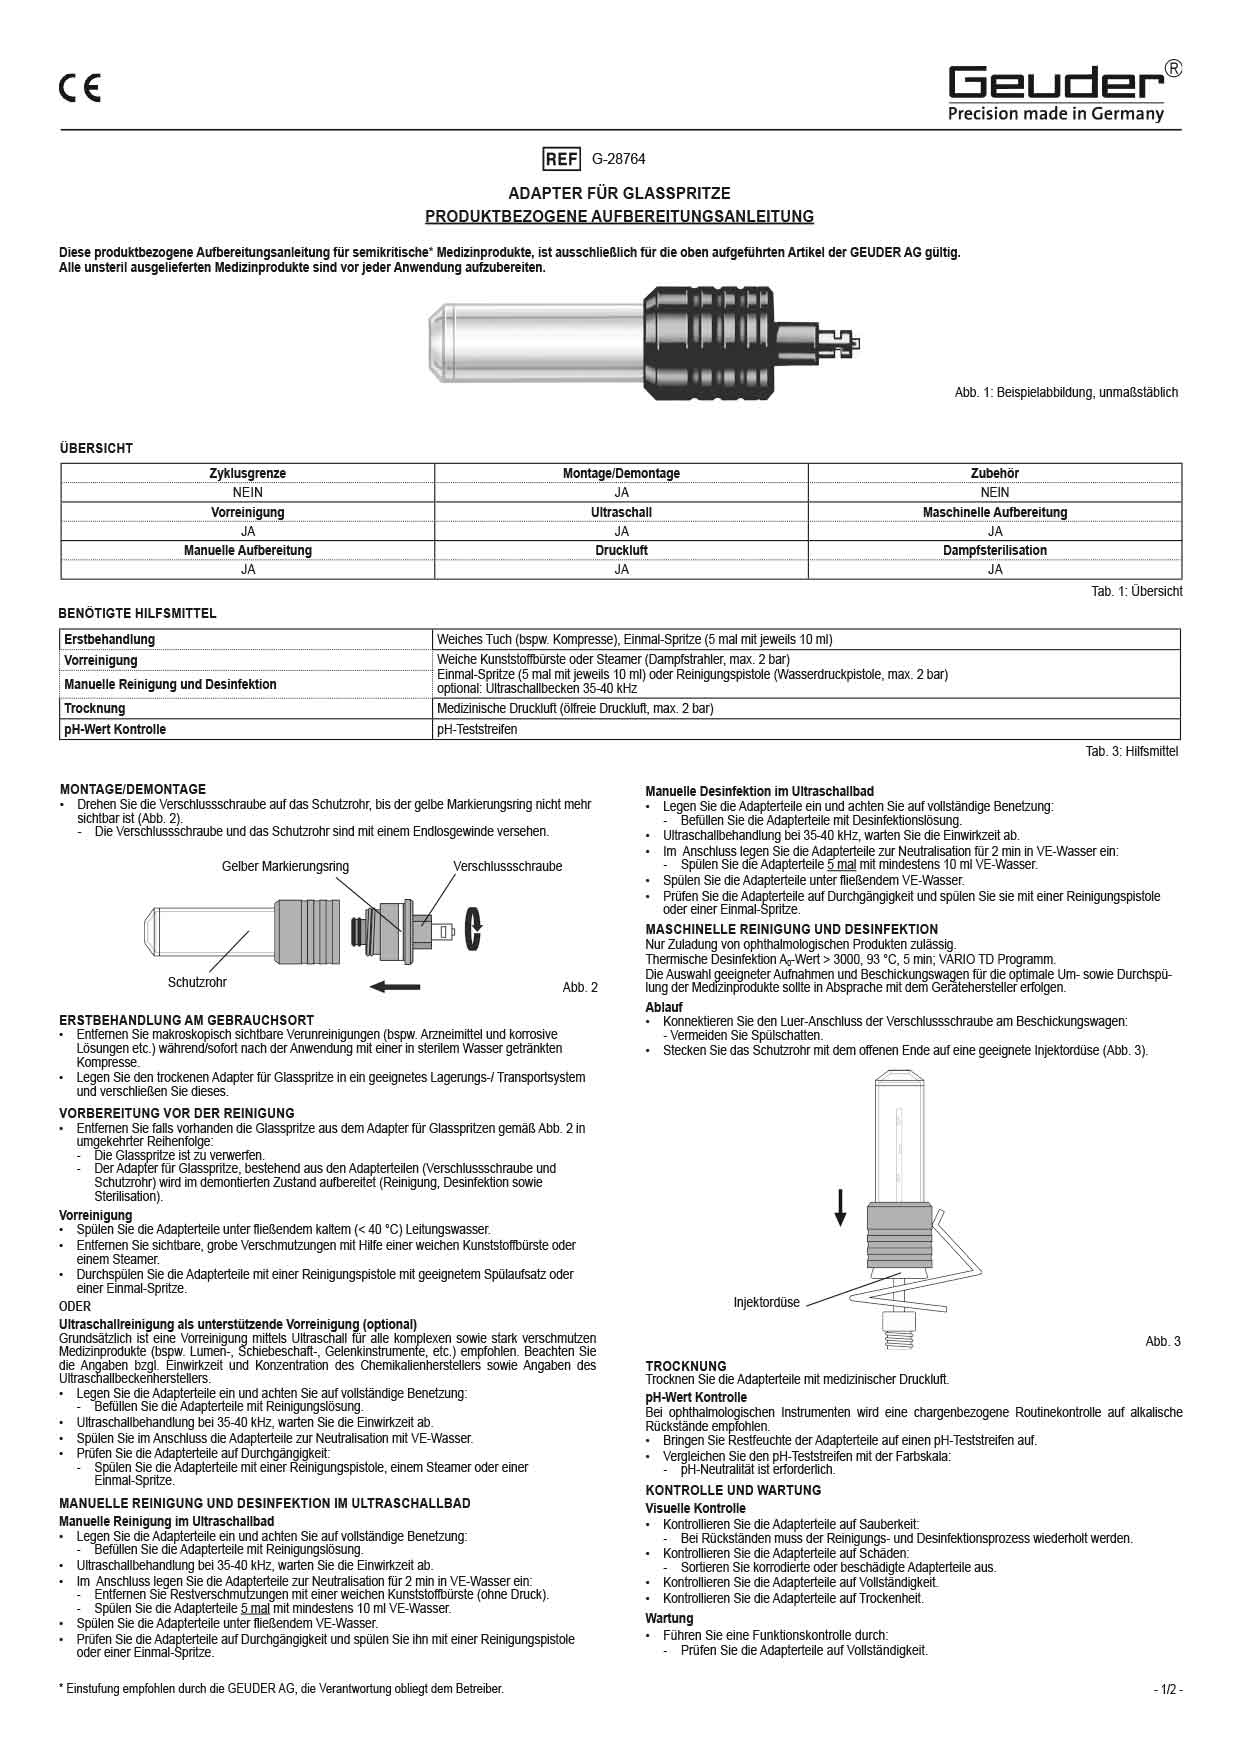 1102206A PA-Adapter with protective cover for glass syringes